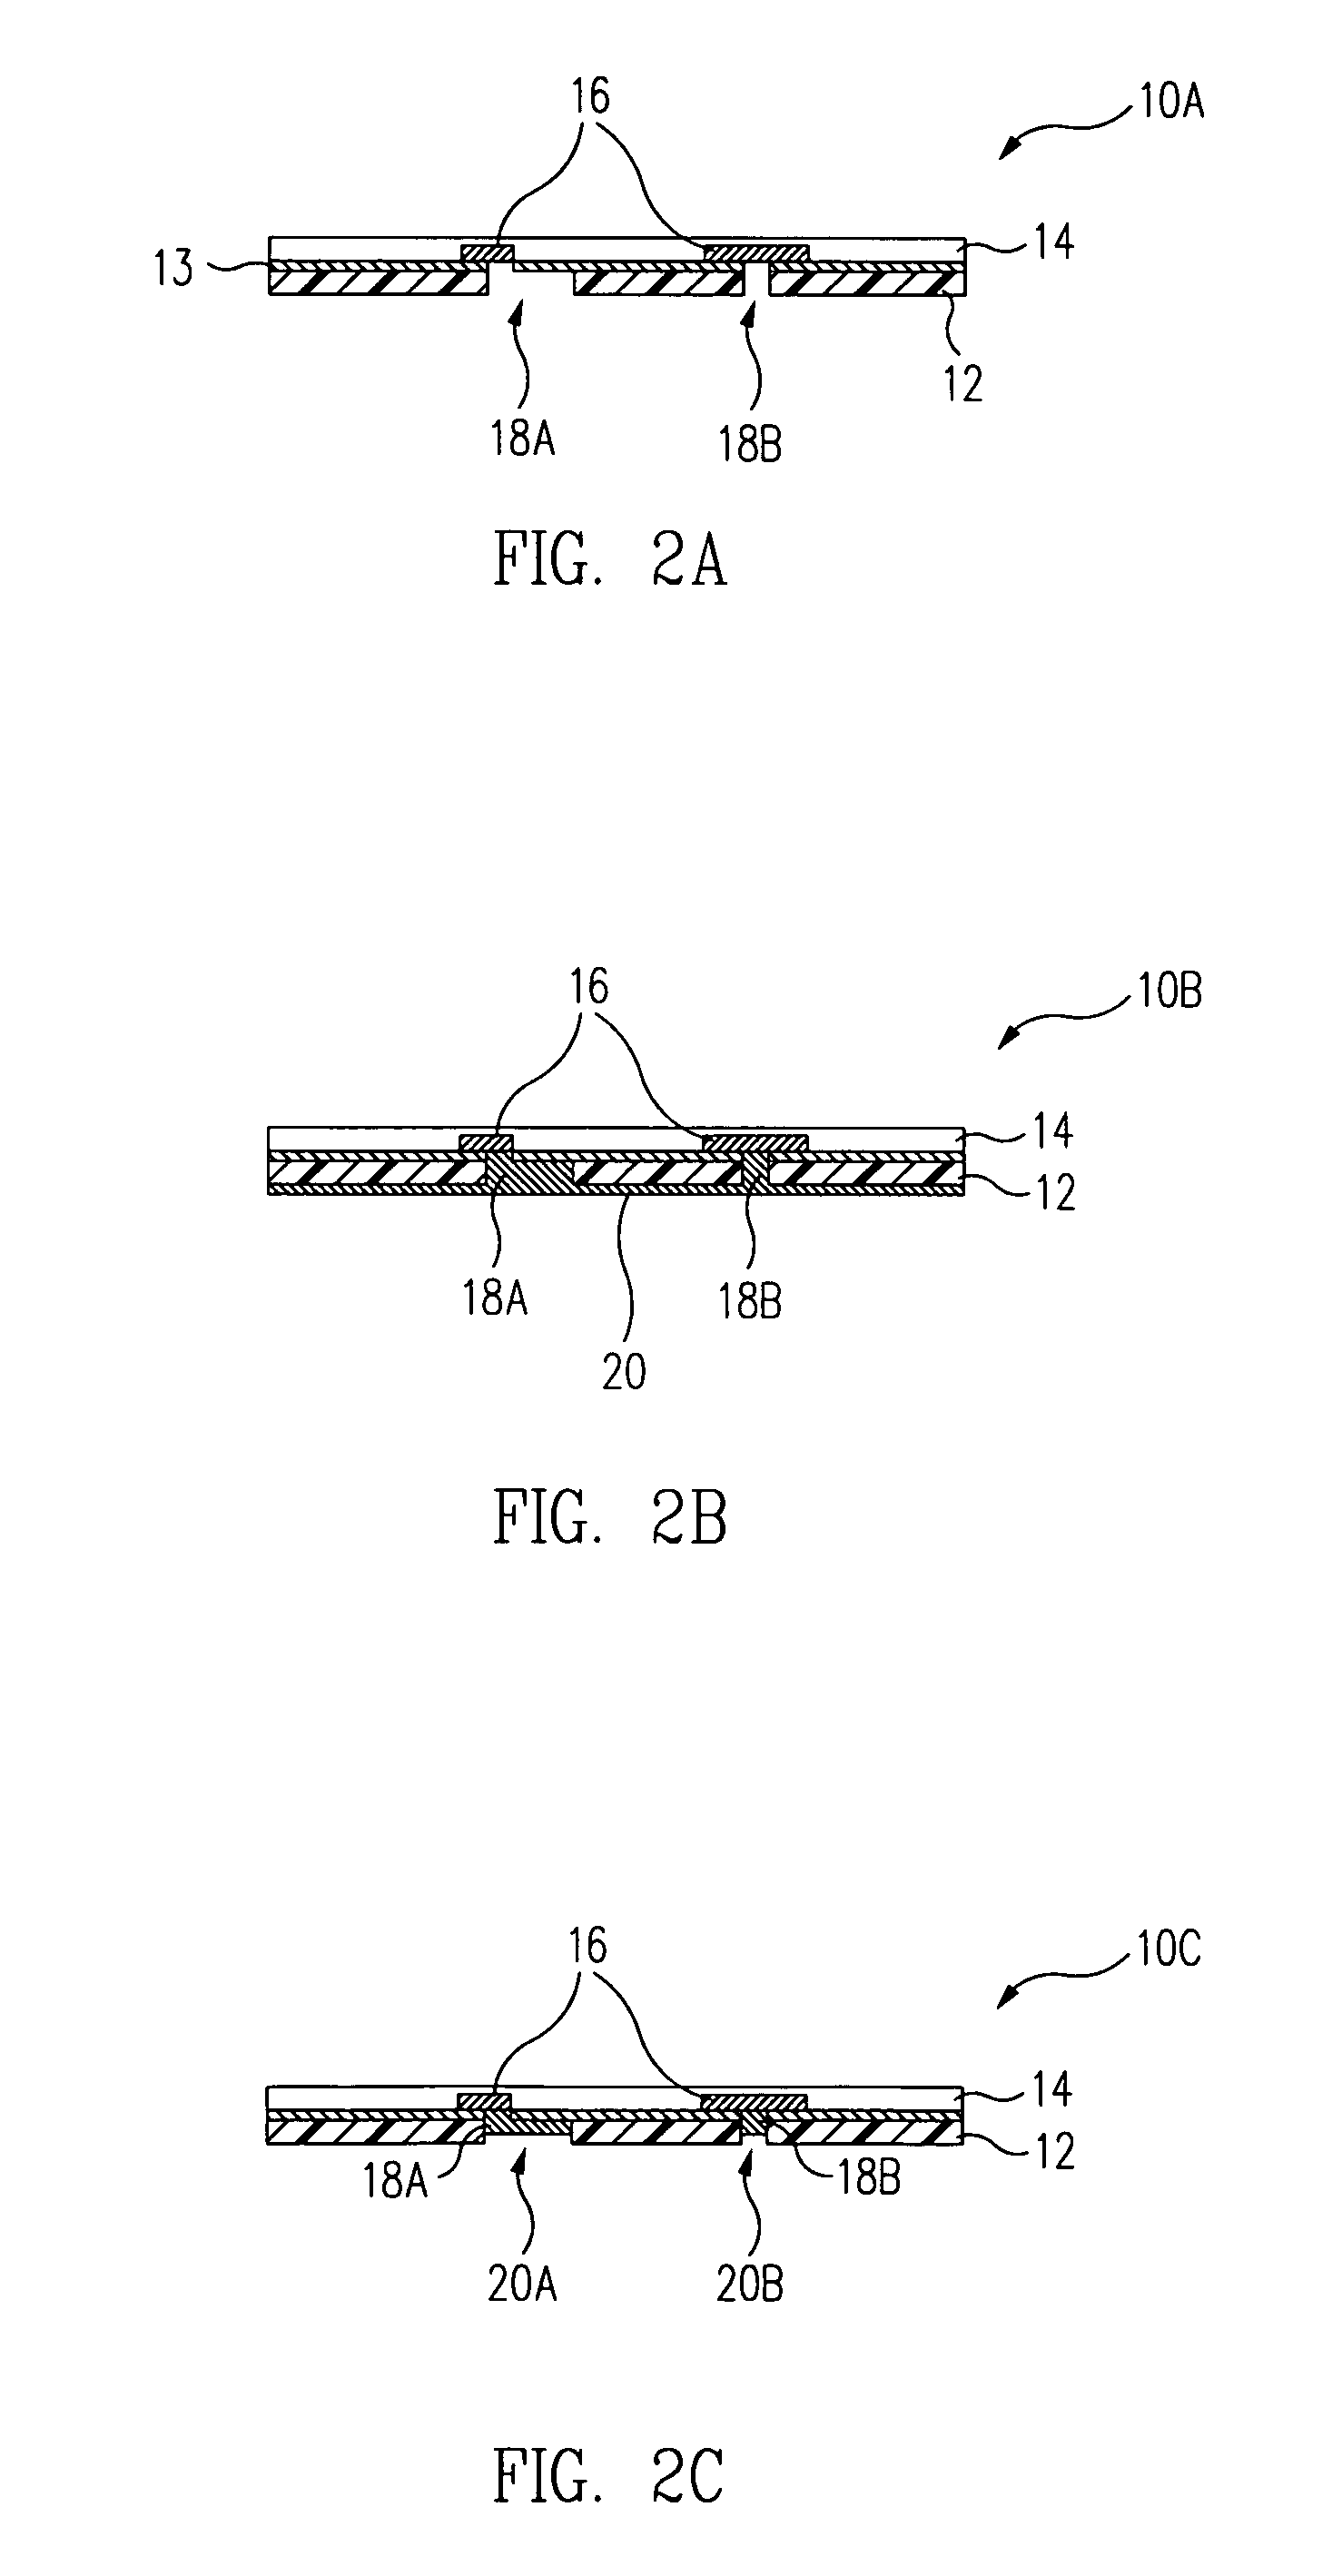 Method for making an integrated circuit substrate having embedded back-side access conductors and vias